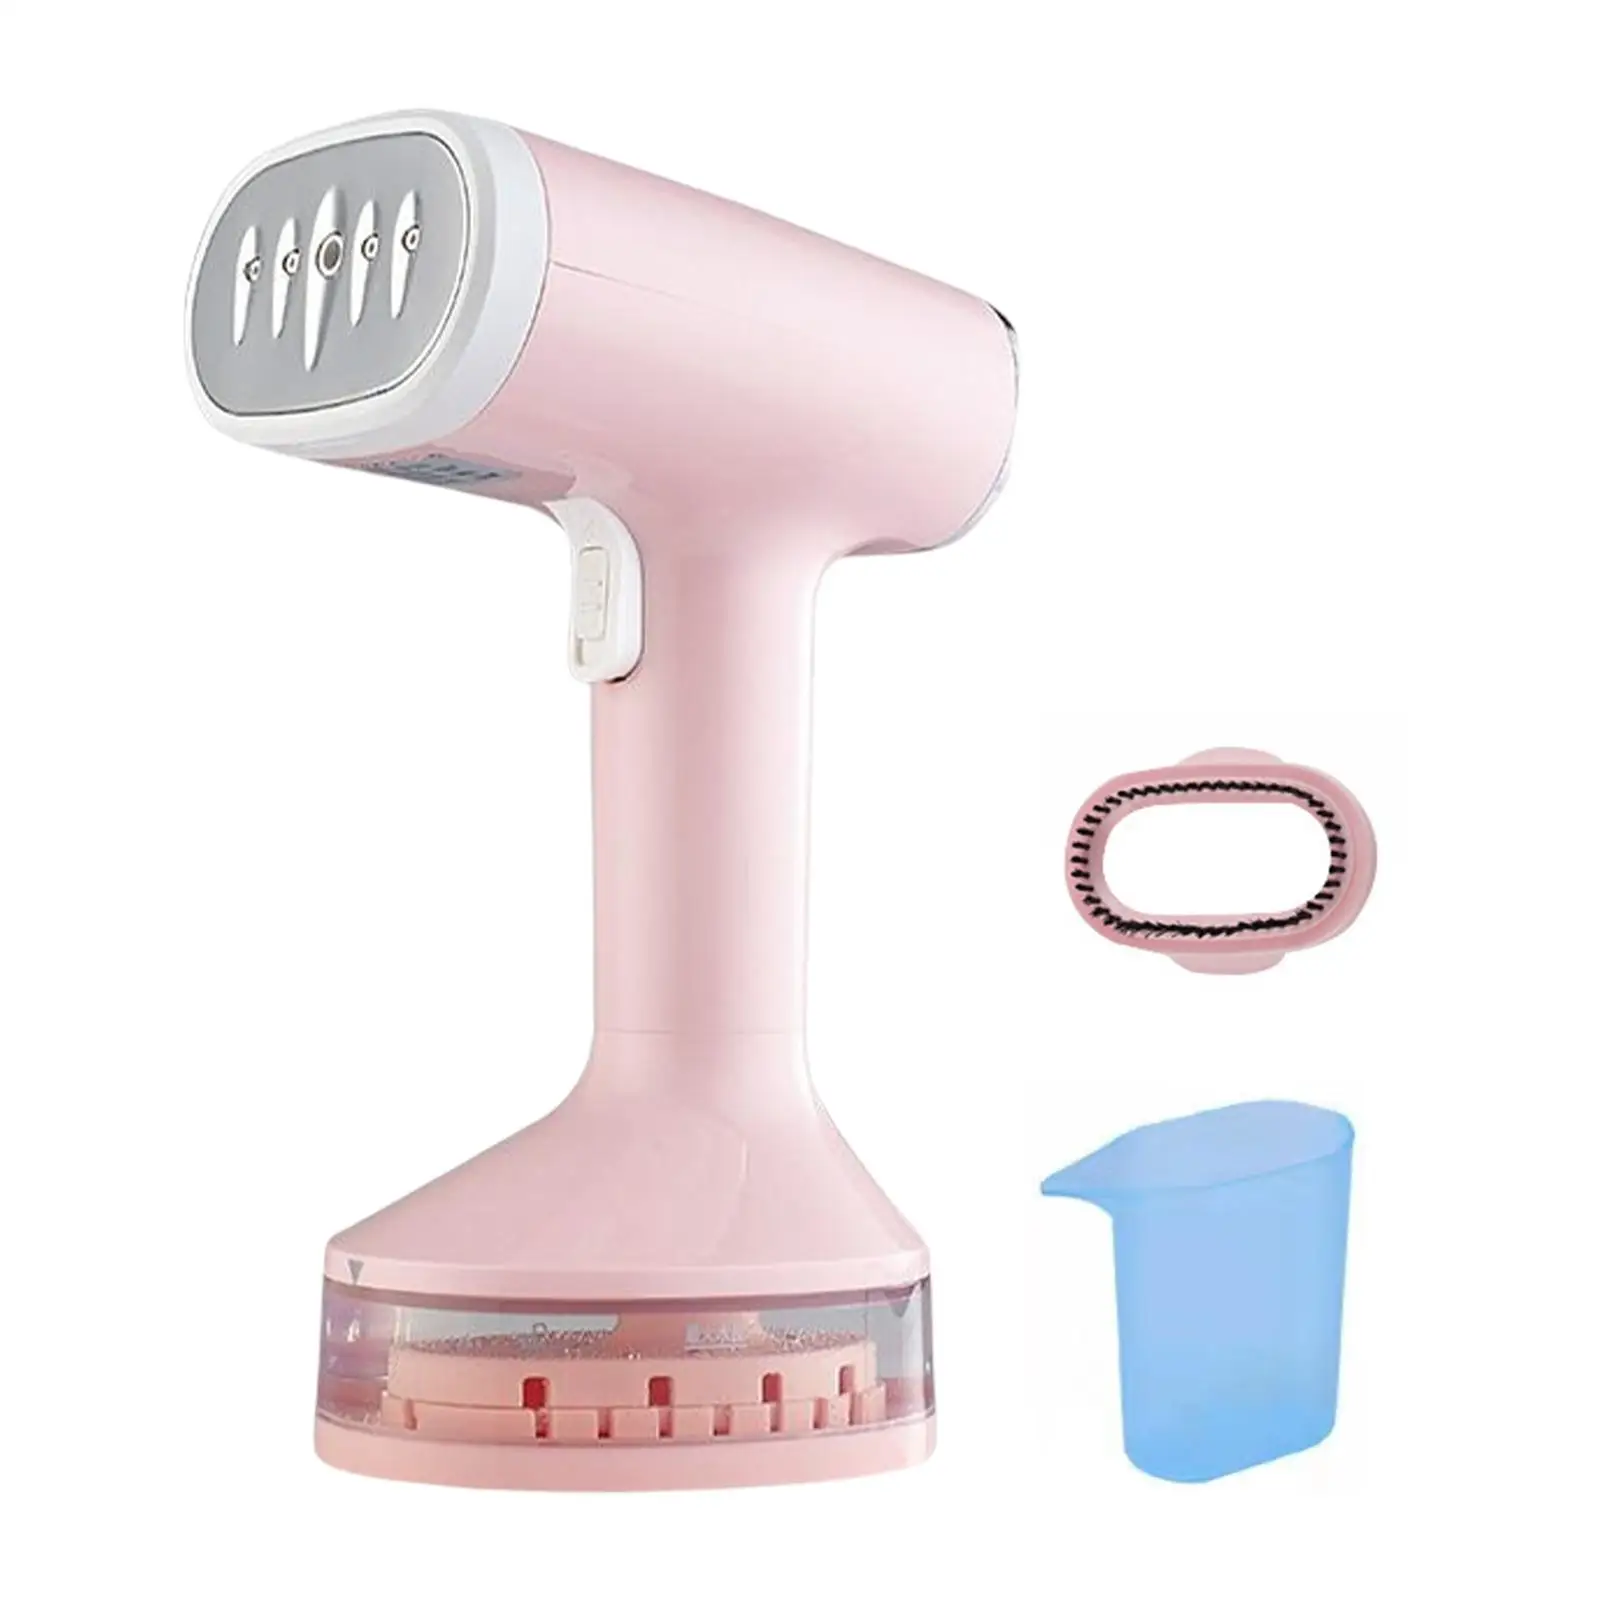 Professional Handheld Clothes Steamer fast heating with 140ml Water Tank Portable Ironing Machine for Household Outing Dormitory